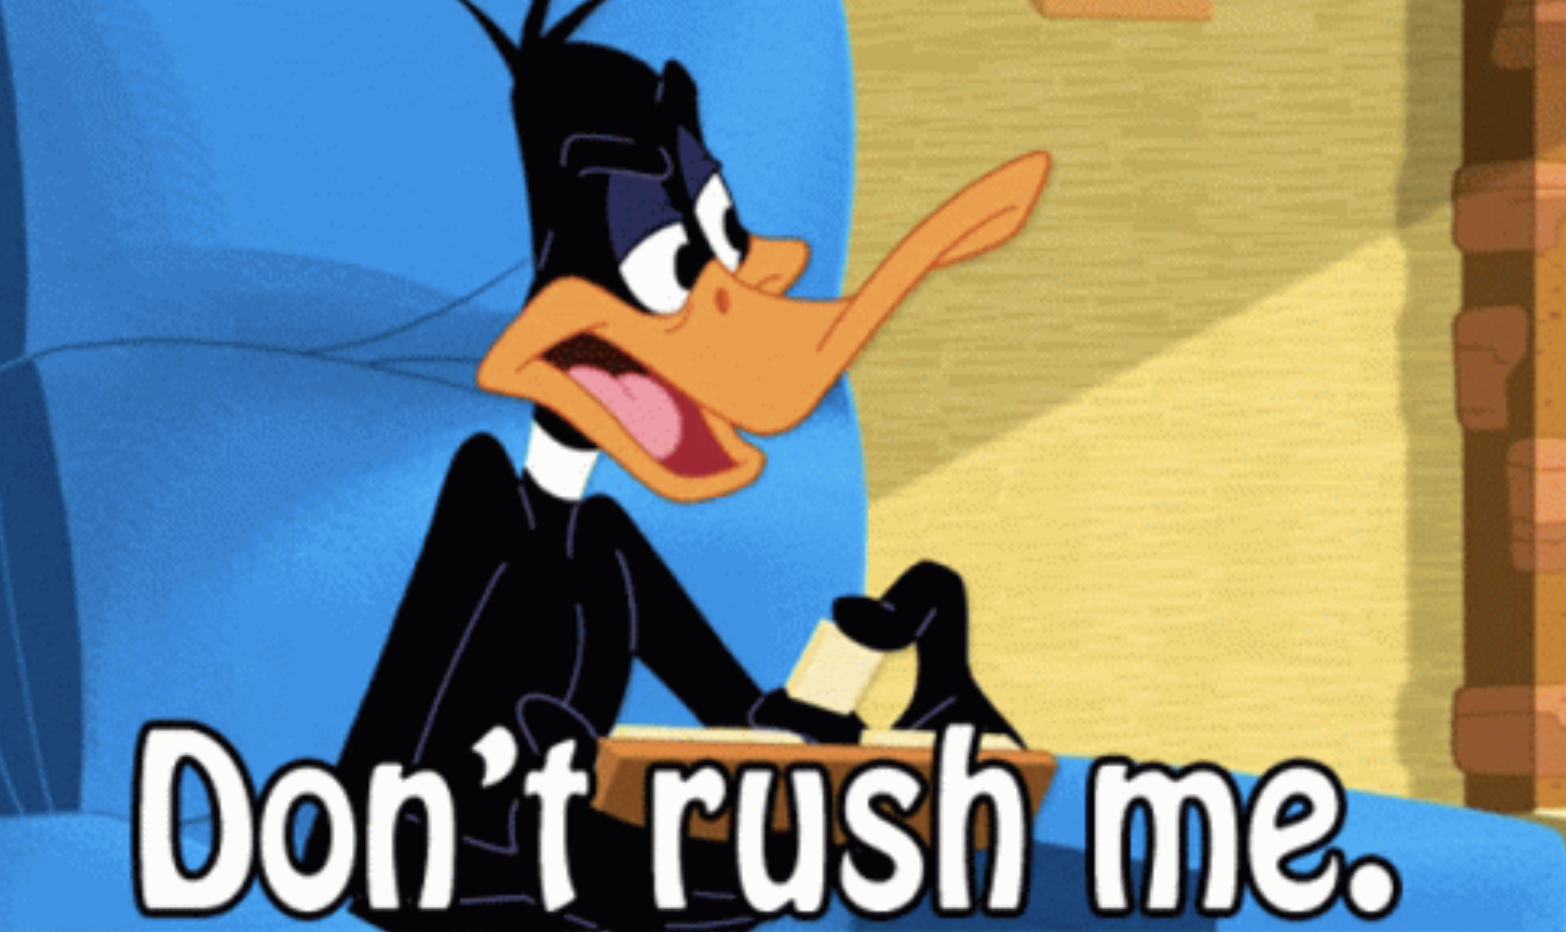 Daffy duck saying &quot;don&#x27;t rush me&quot;